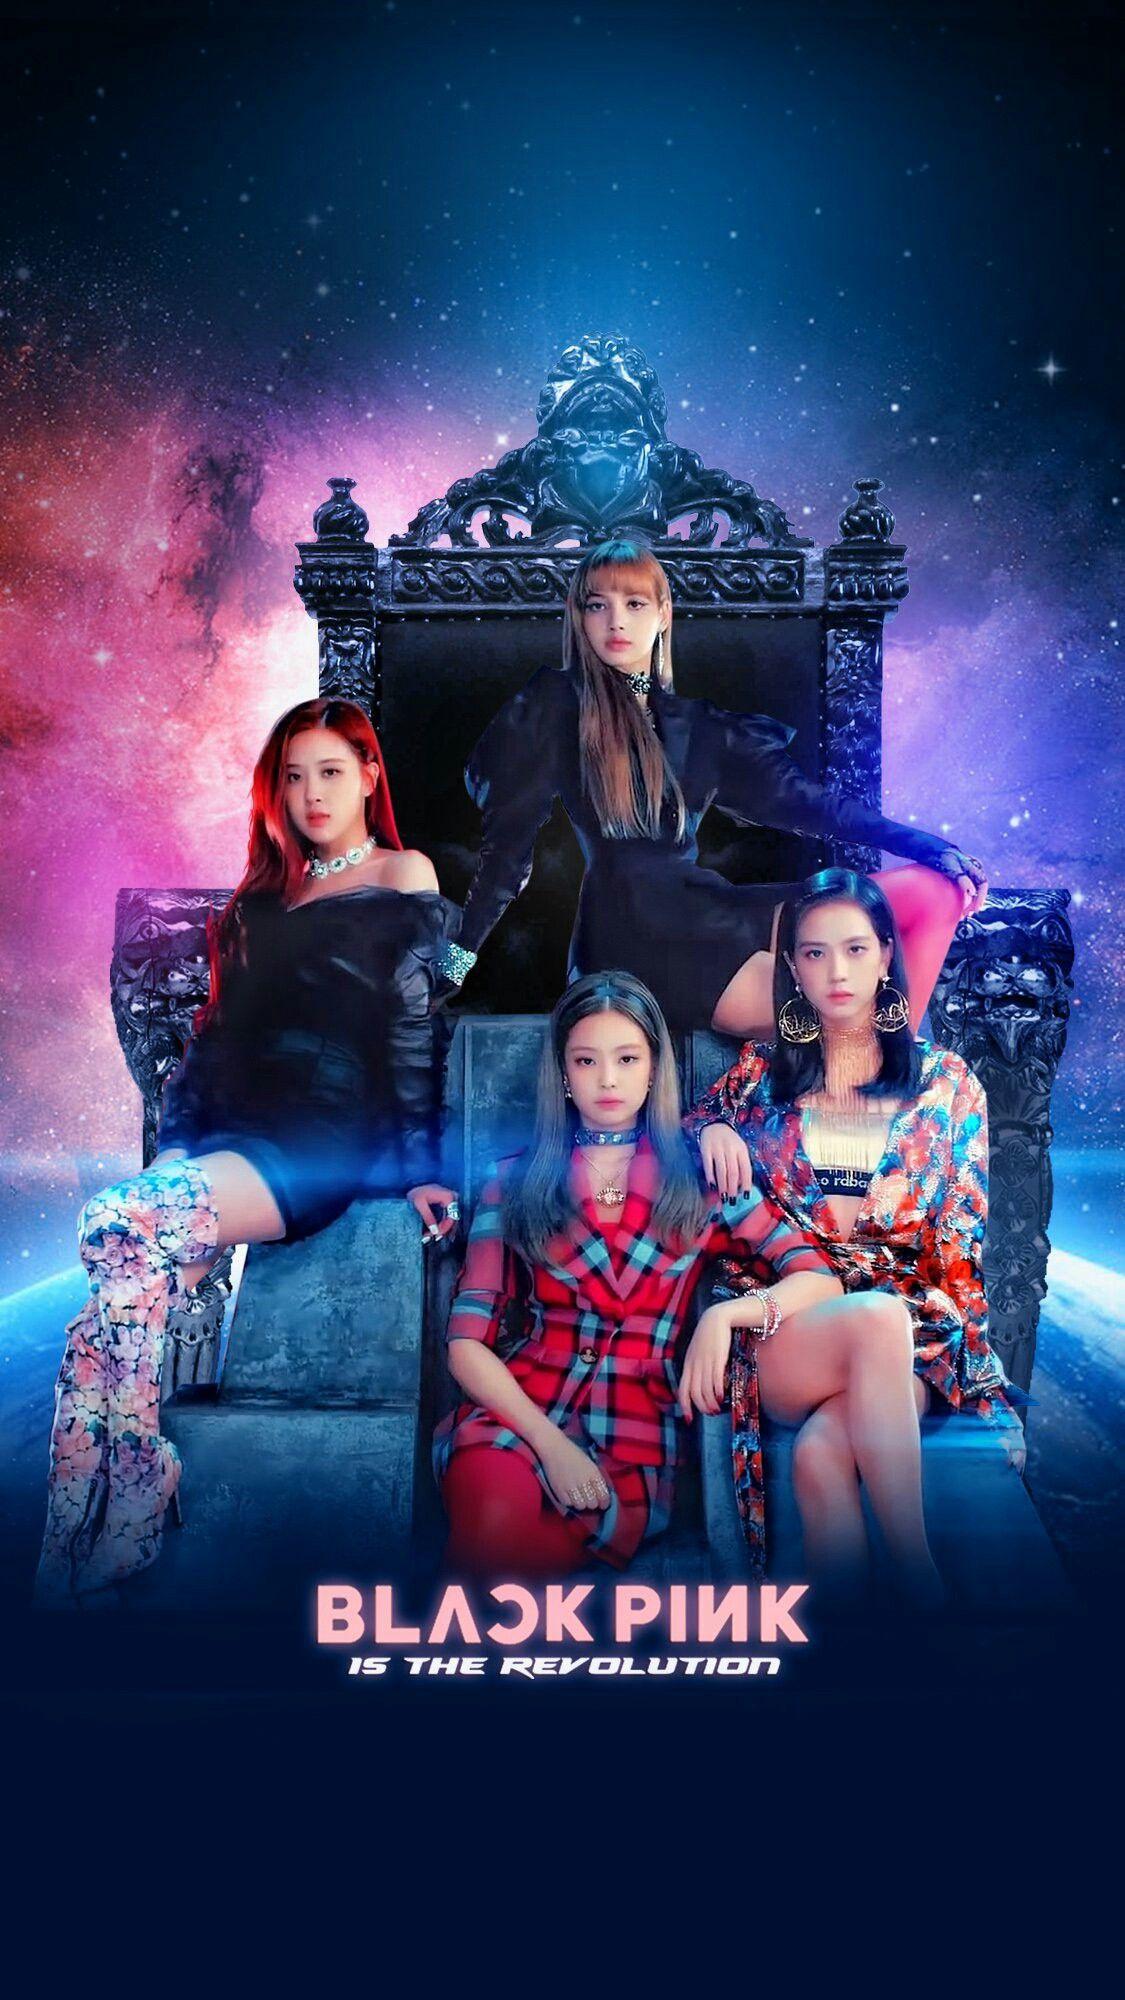 from BLACKPINK IN YOUR AREA to BLACKPINK IS THE REVOLUTION